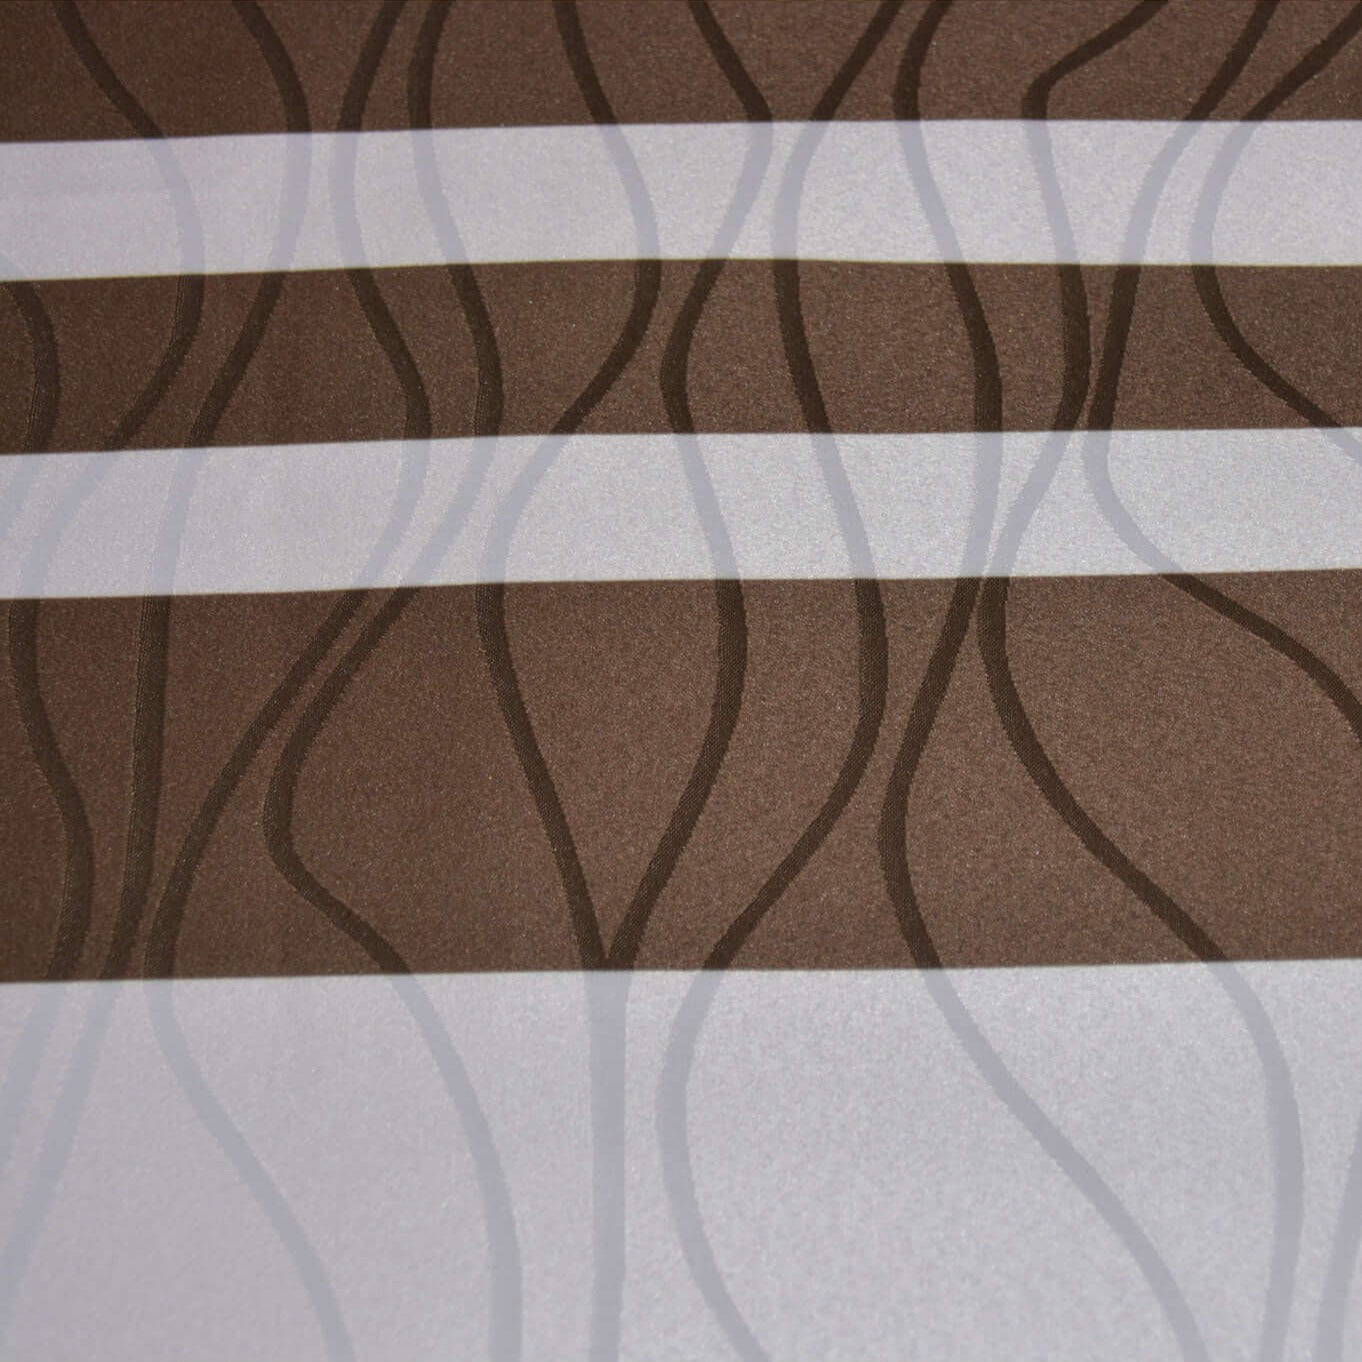 Wave with Integrated Brown Decorative Top Sheet